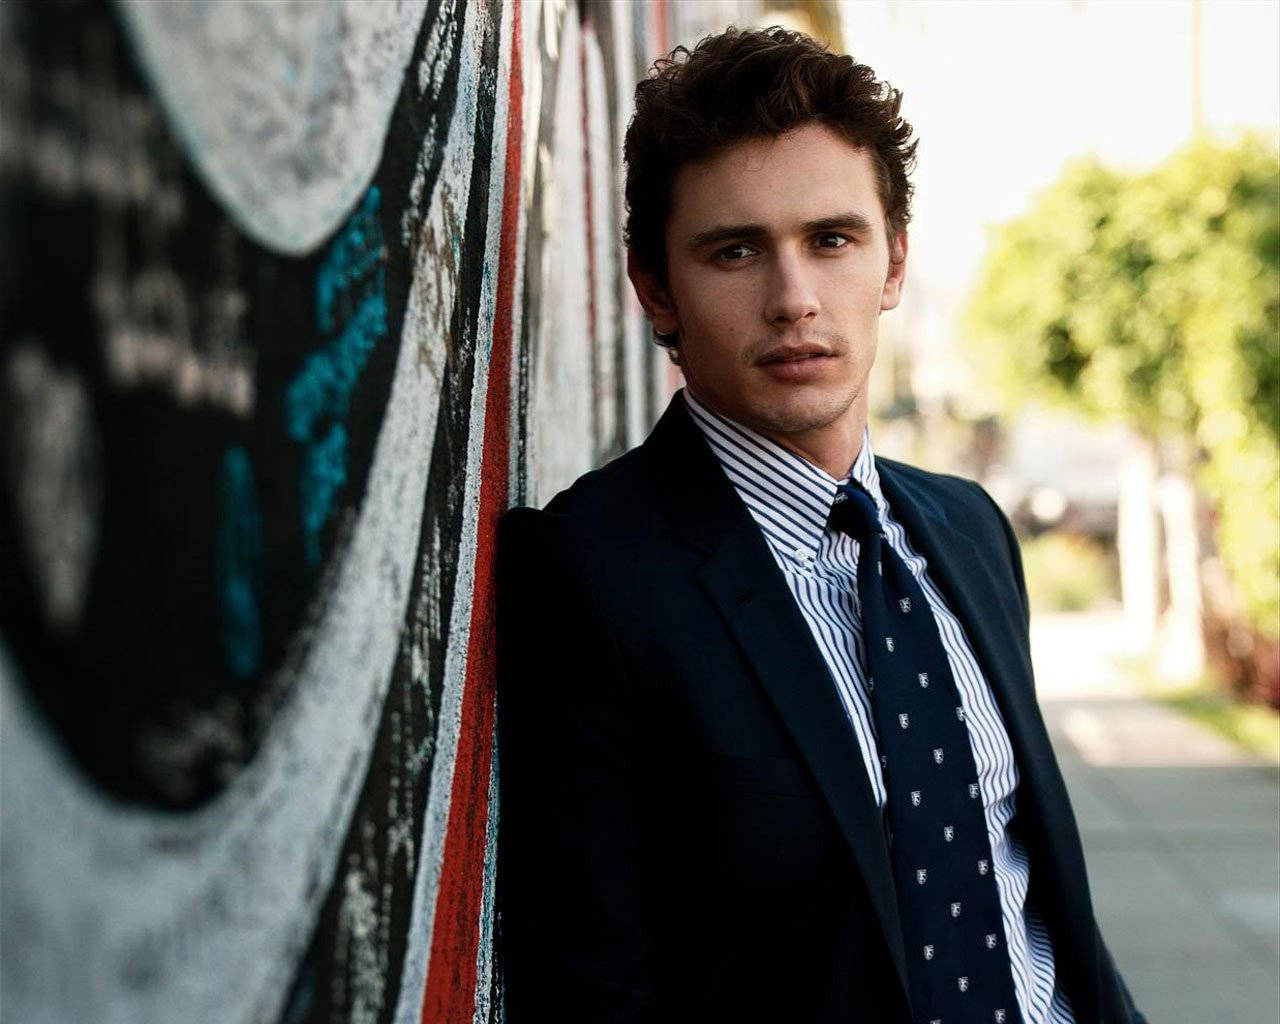 Hollywood Star James Franco Posing During A Street Photoshoot Background